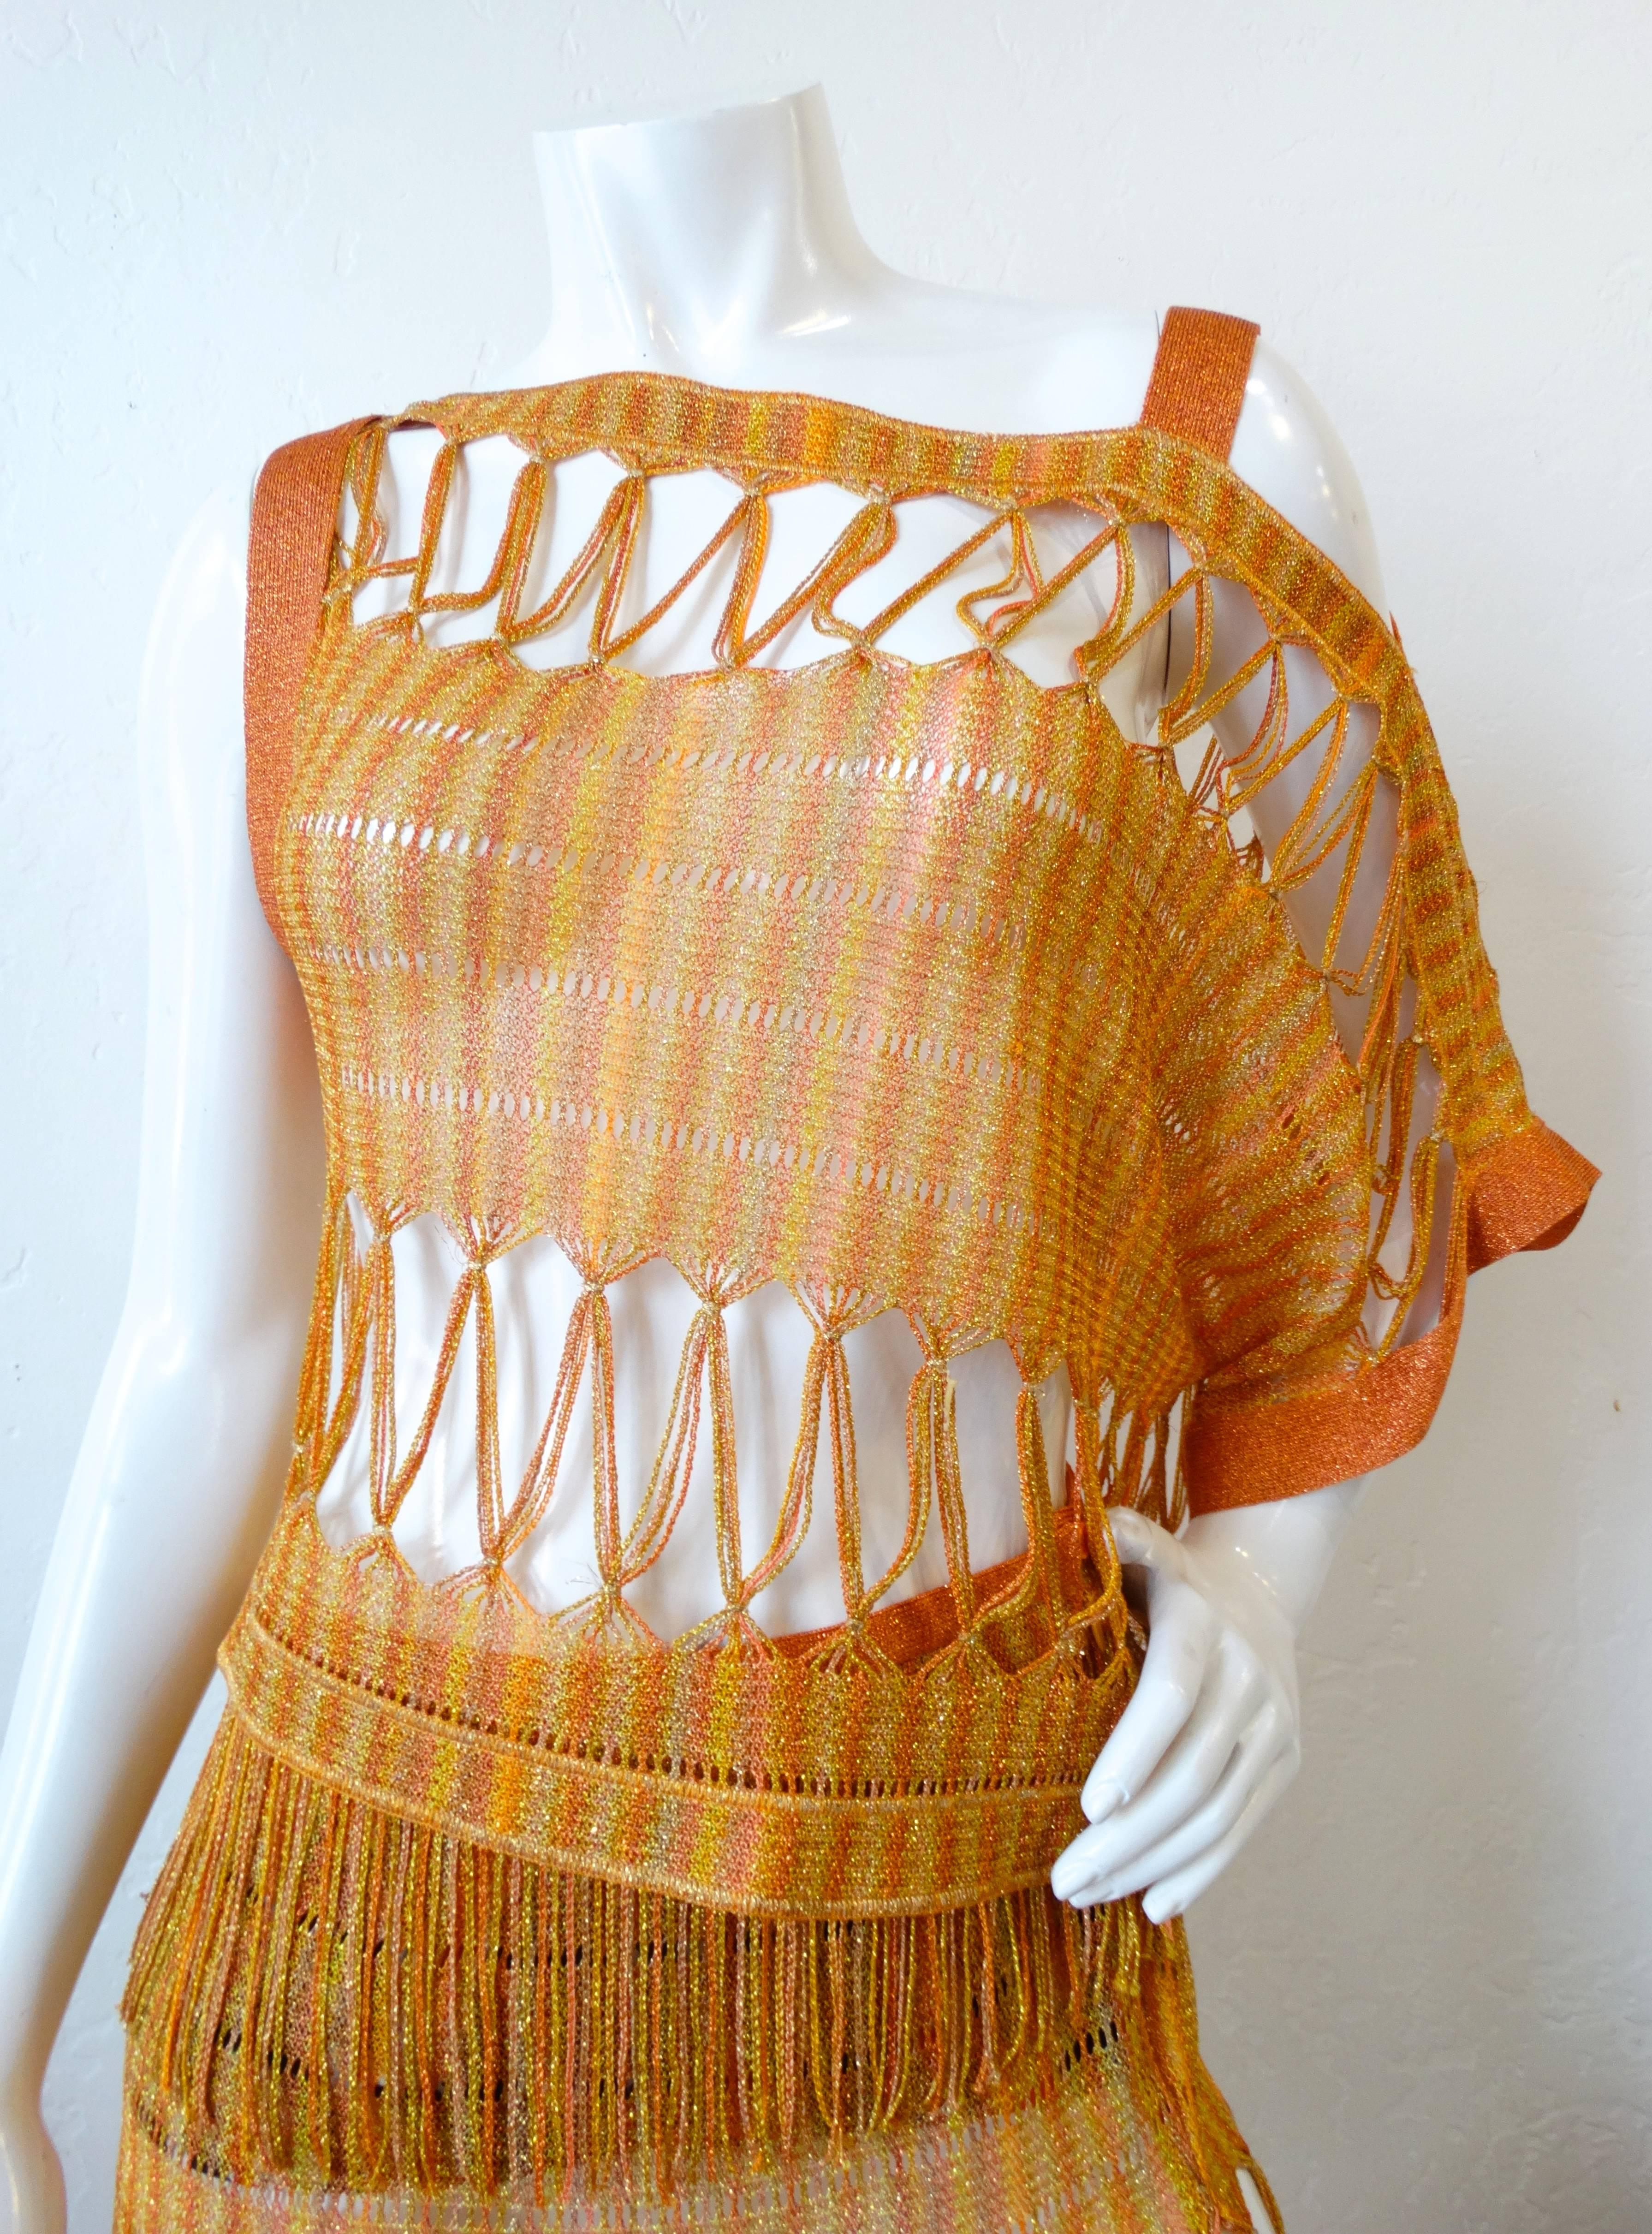 The PERFECT Missoni set for festival season- down to the fringe! Open weave knit made of metallic orange and yellow thread. Top has a unique silhouette, sleeveless on one side and strappy on the other. Looks incredible worn over a swim suit. Skirt